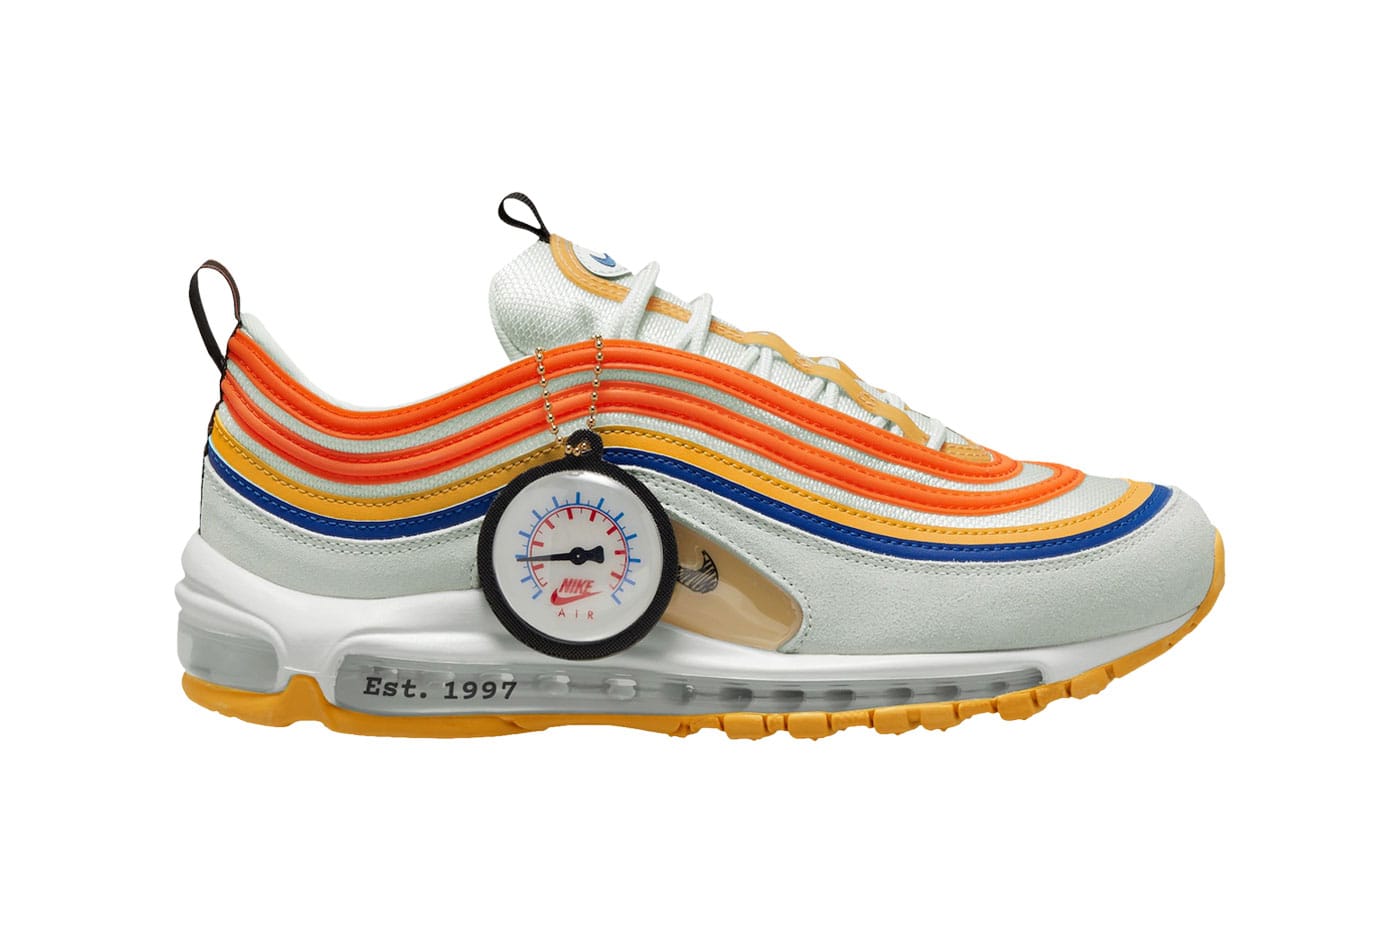 when did air max 97s come out